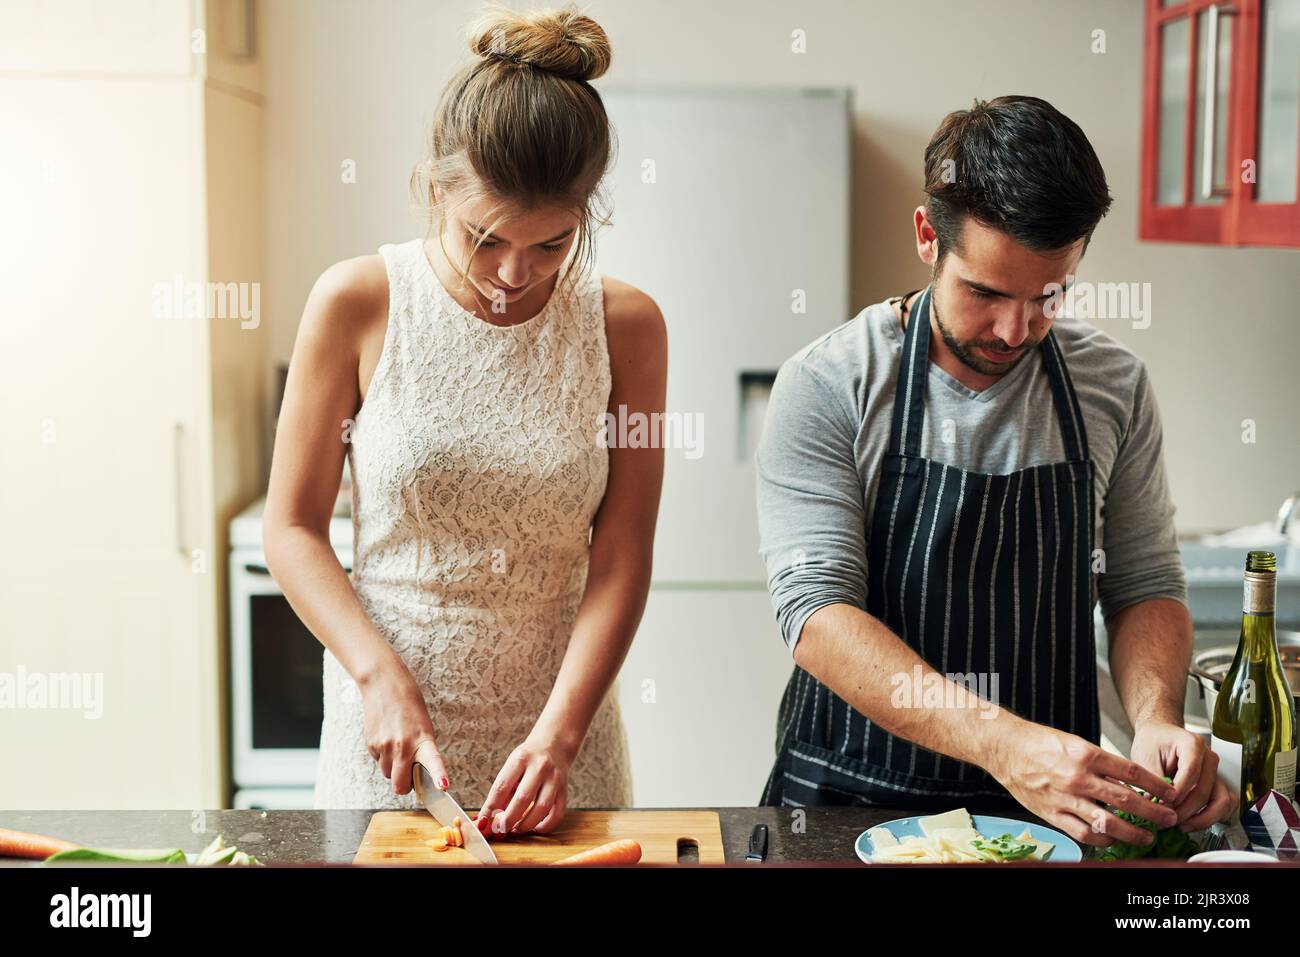 Cooking with love provides food for the soul. an affectionate young couple preparing food together at home. Stock Photo